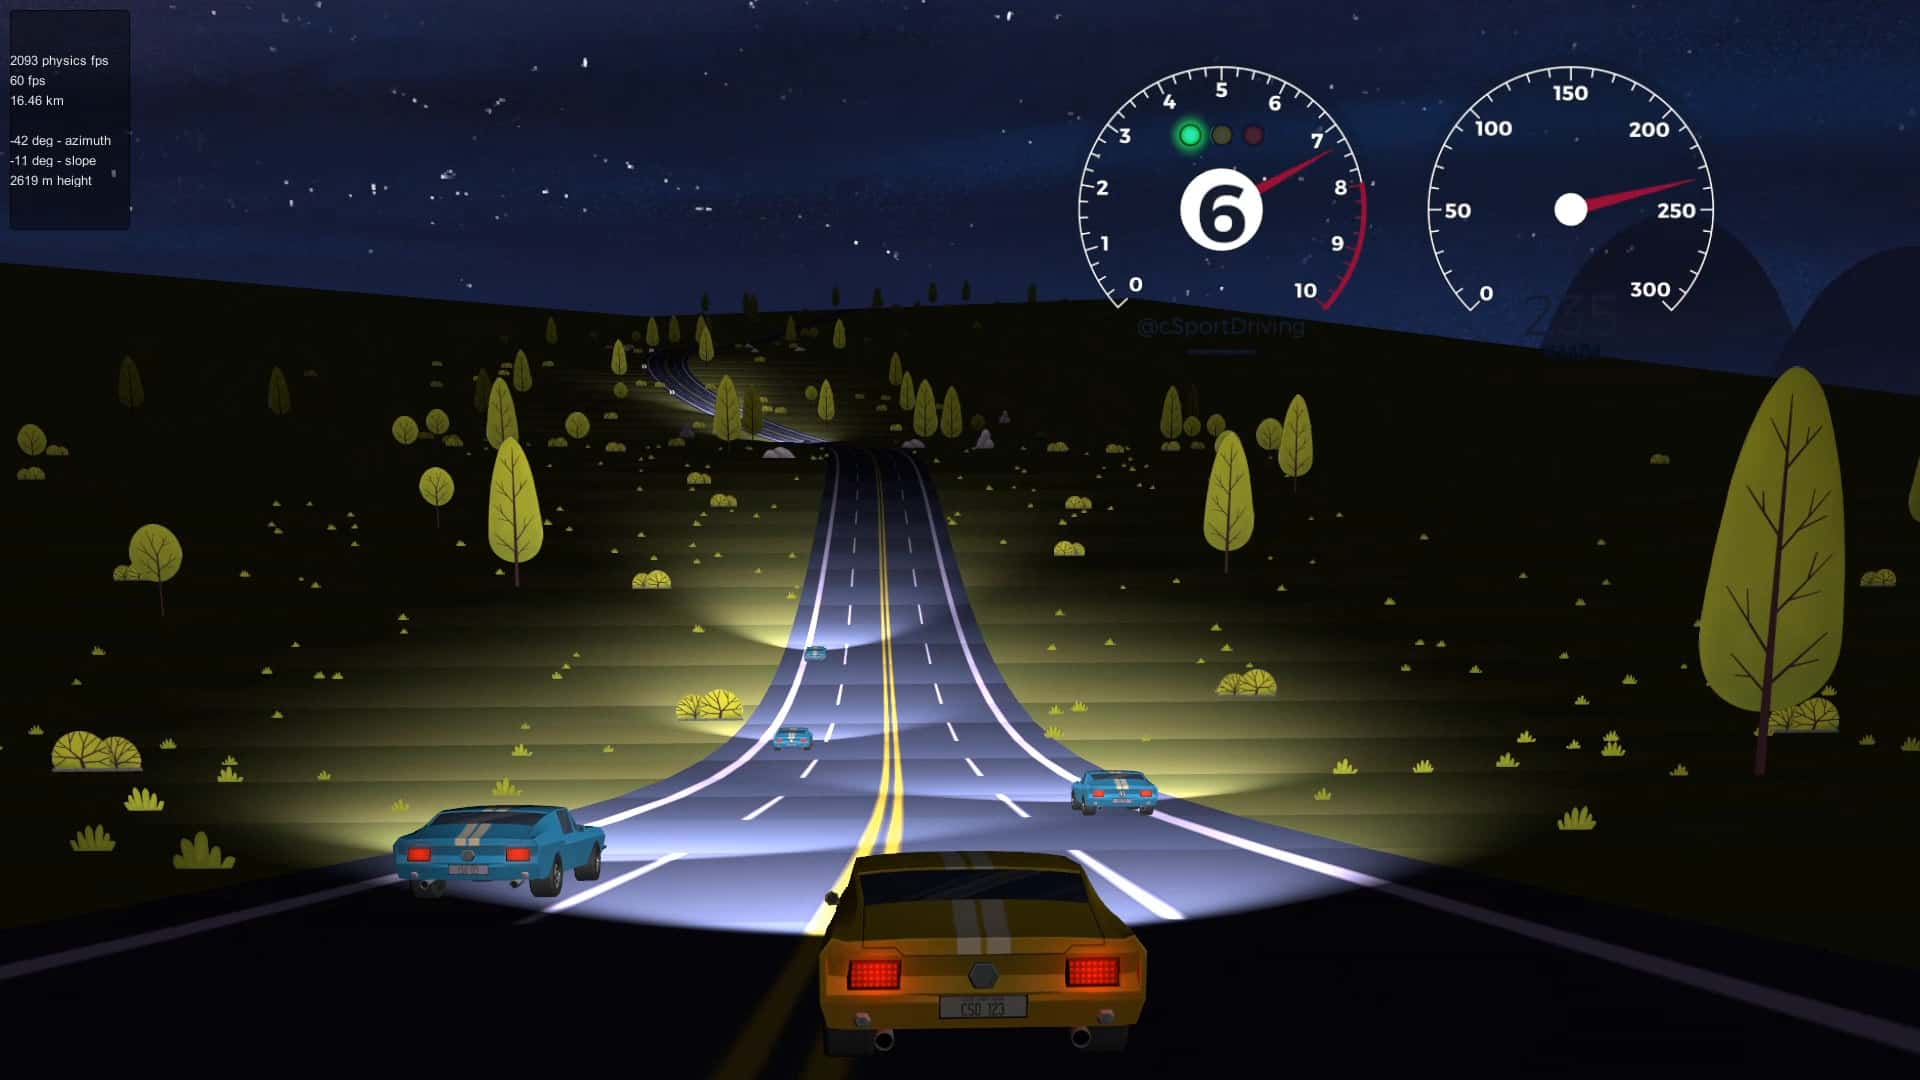 Classic Sport Driving goes retro arcade racing this December